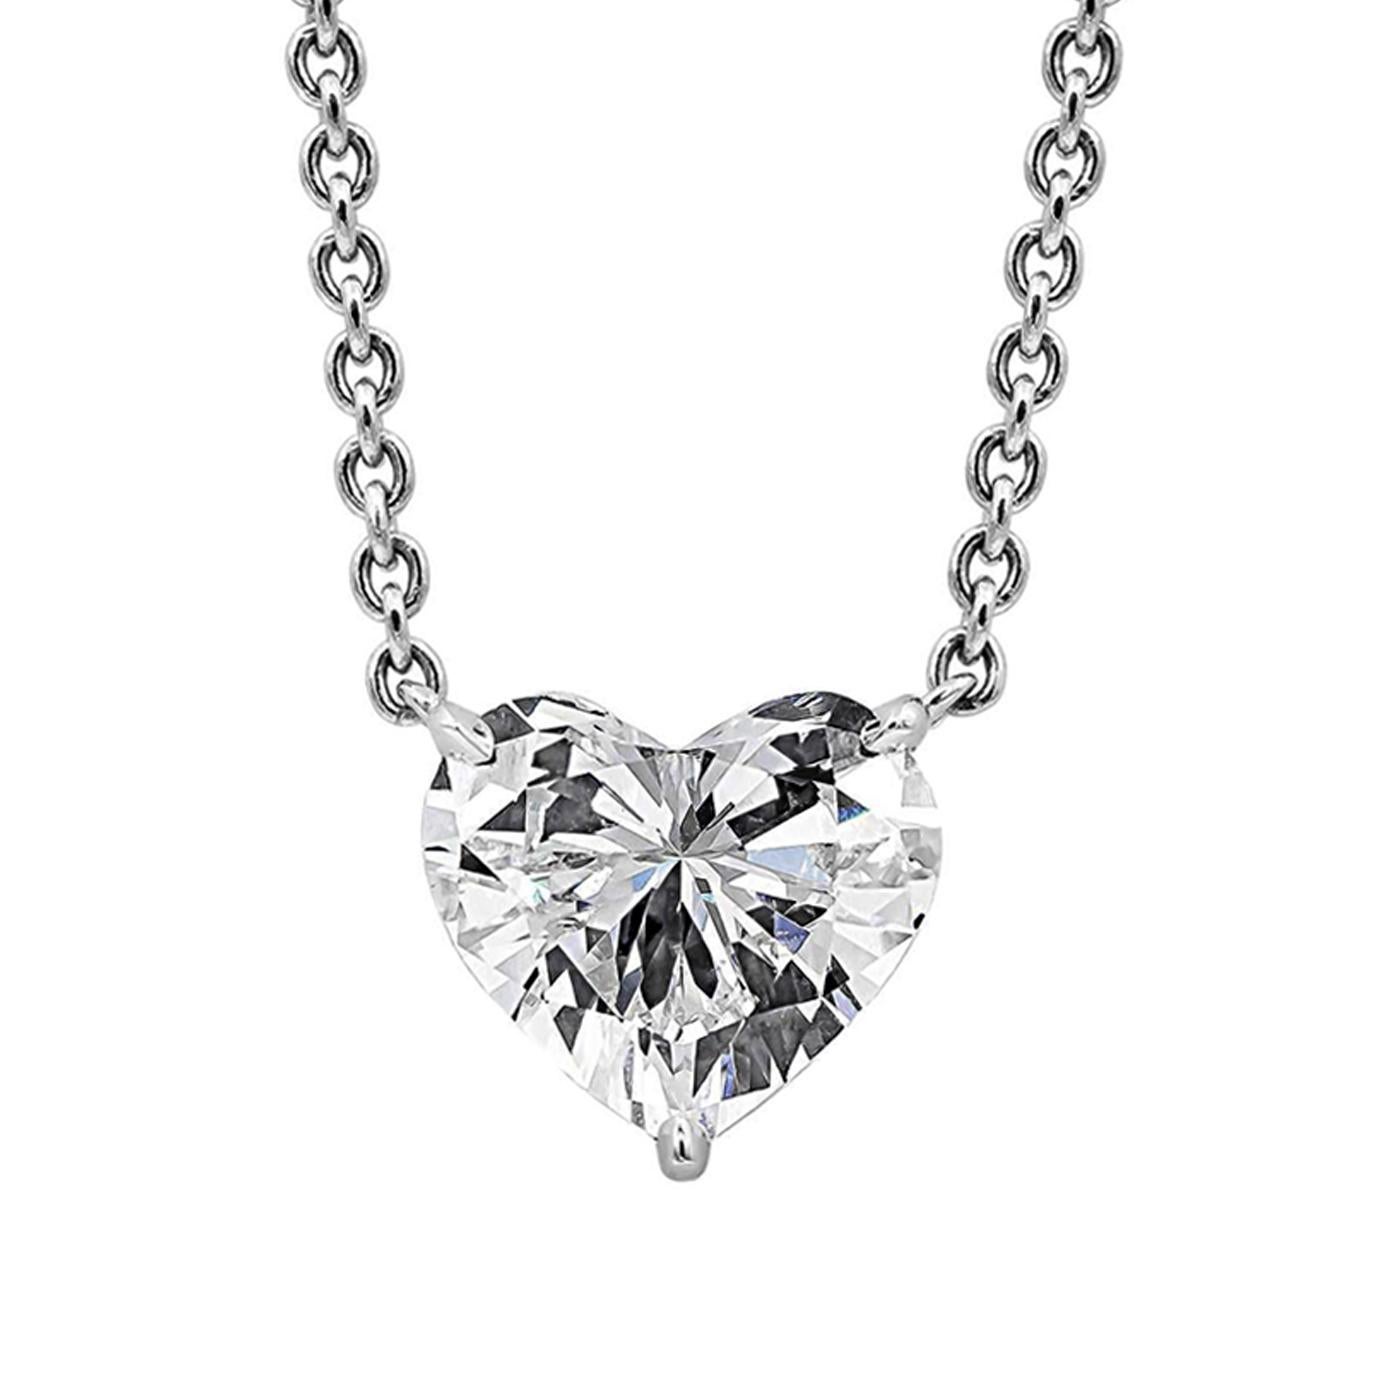 This Necklace Features a 2.21ct Natural Heart Shape Diamond with D Color and VS2 Clarity Enhanced This Beautiful necklace is an essential piece of jewelry. Wear this versatile pendant for some chic sparkle fancy diamond. A stylish finish that gives